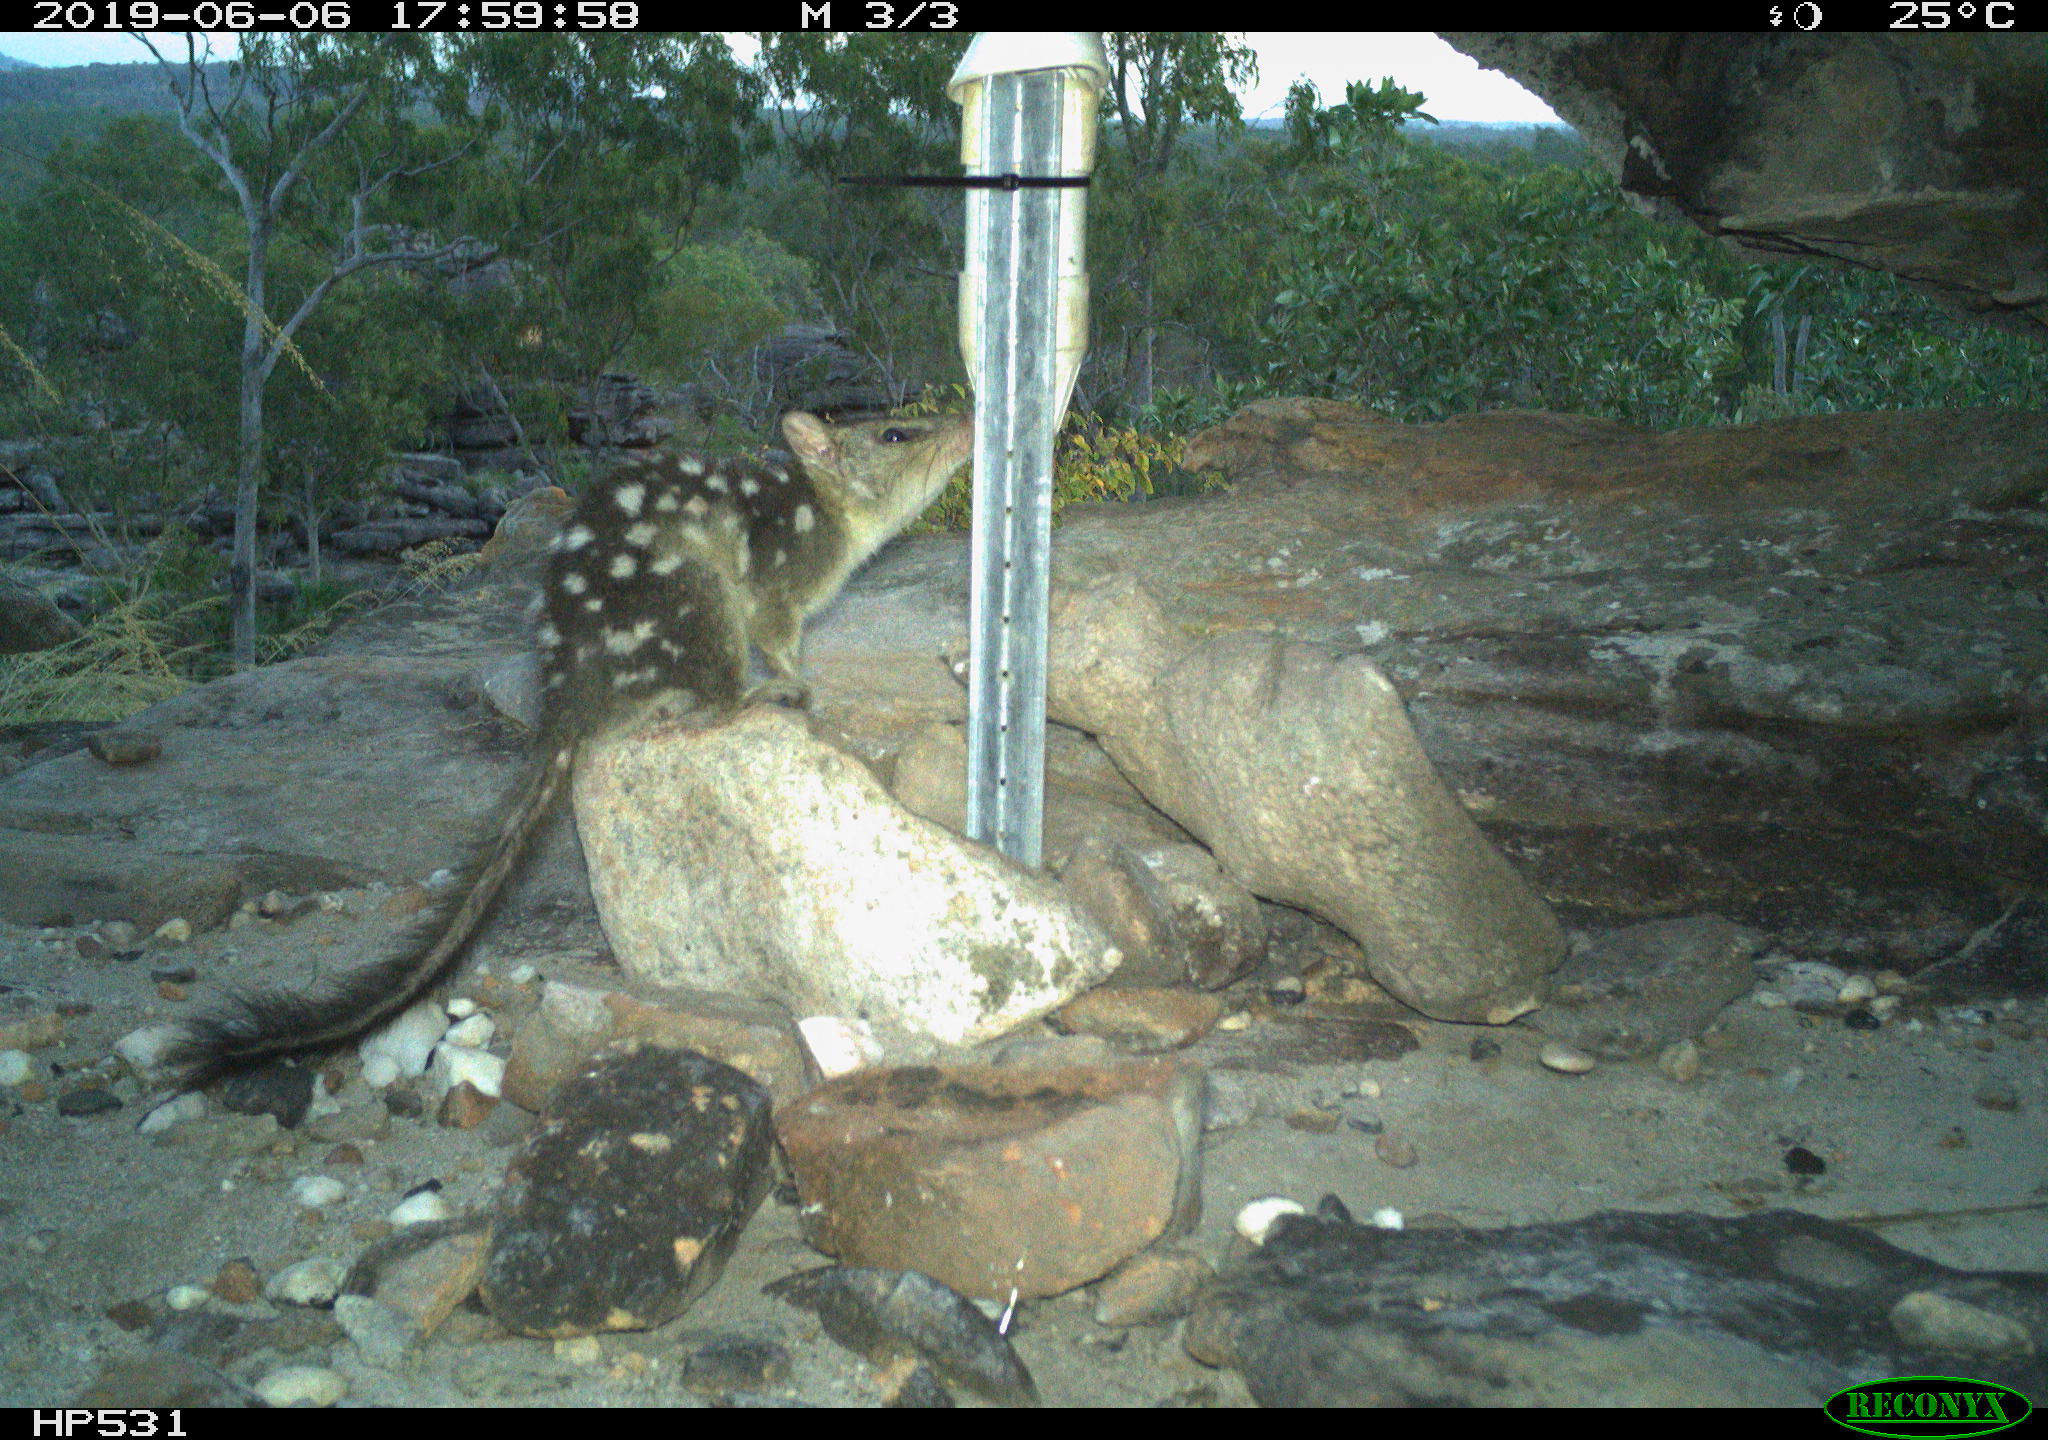 Camera trap quoll image – quoll is up close to a bait